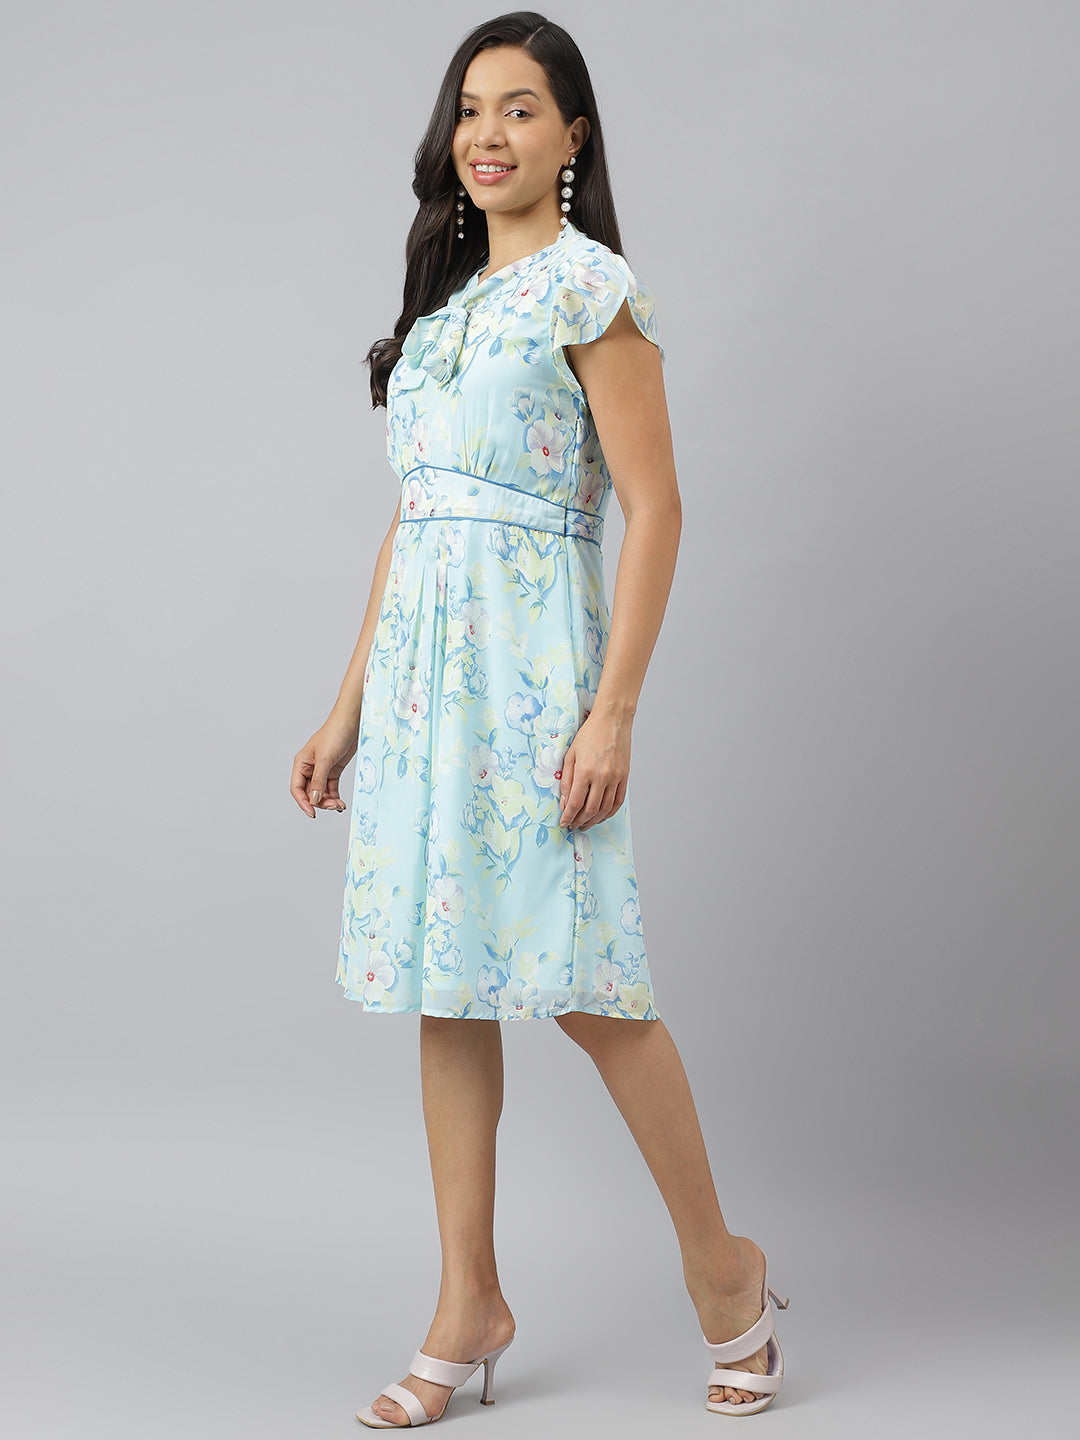 Blue Floral Printed Cap Sleeve With Tie Up Neck A Line Dress